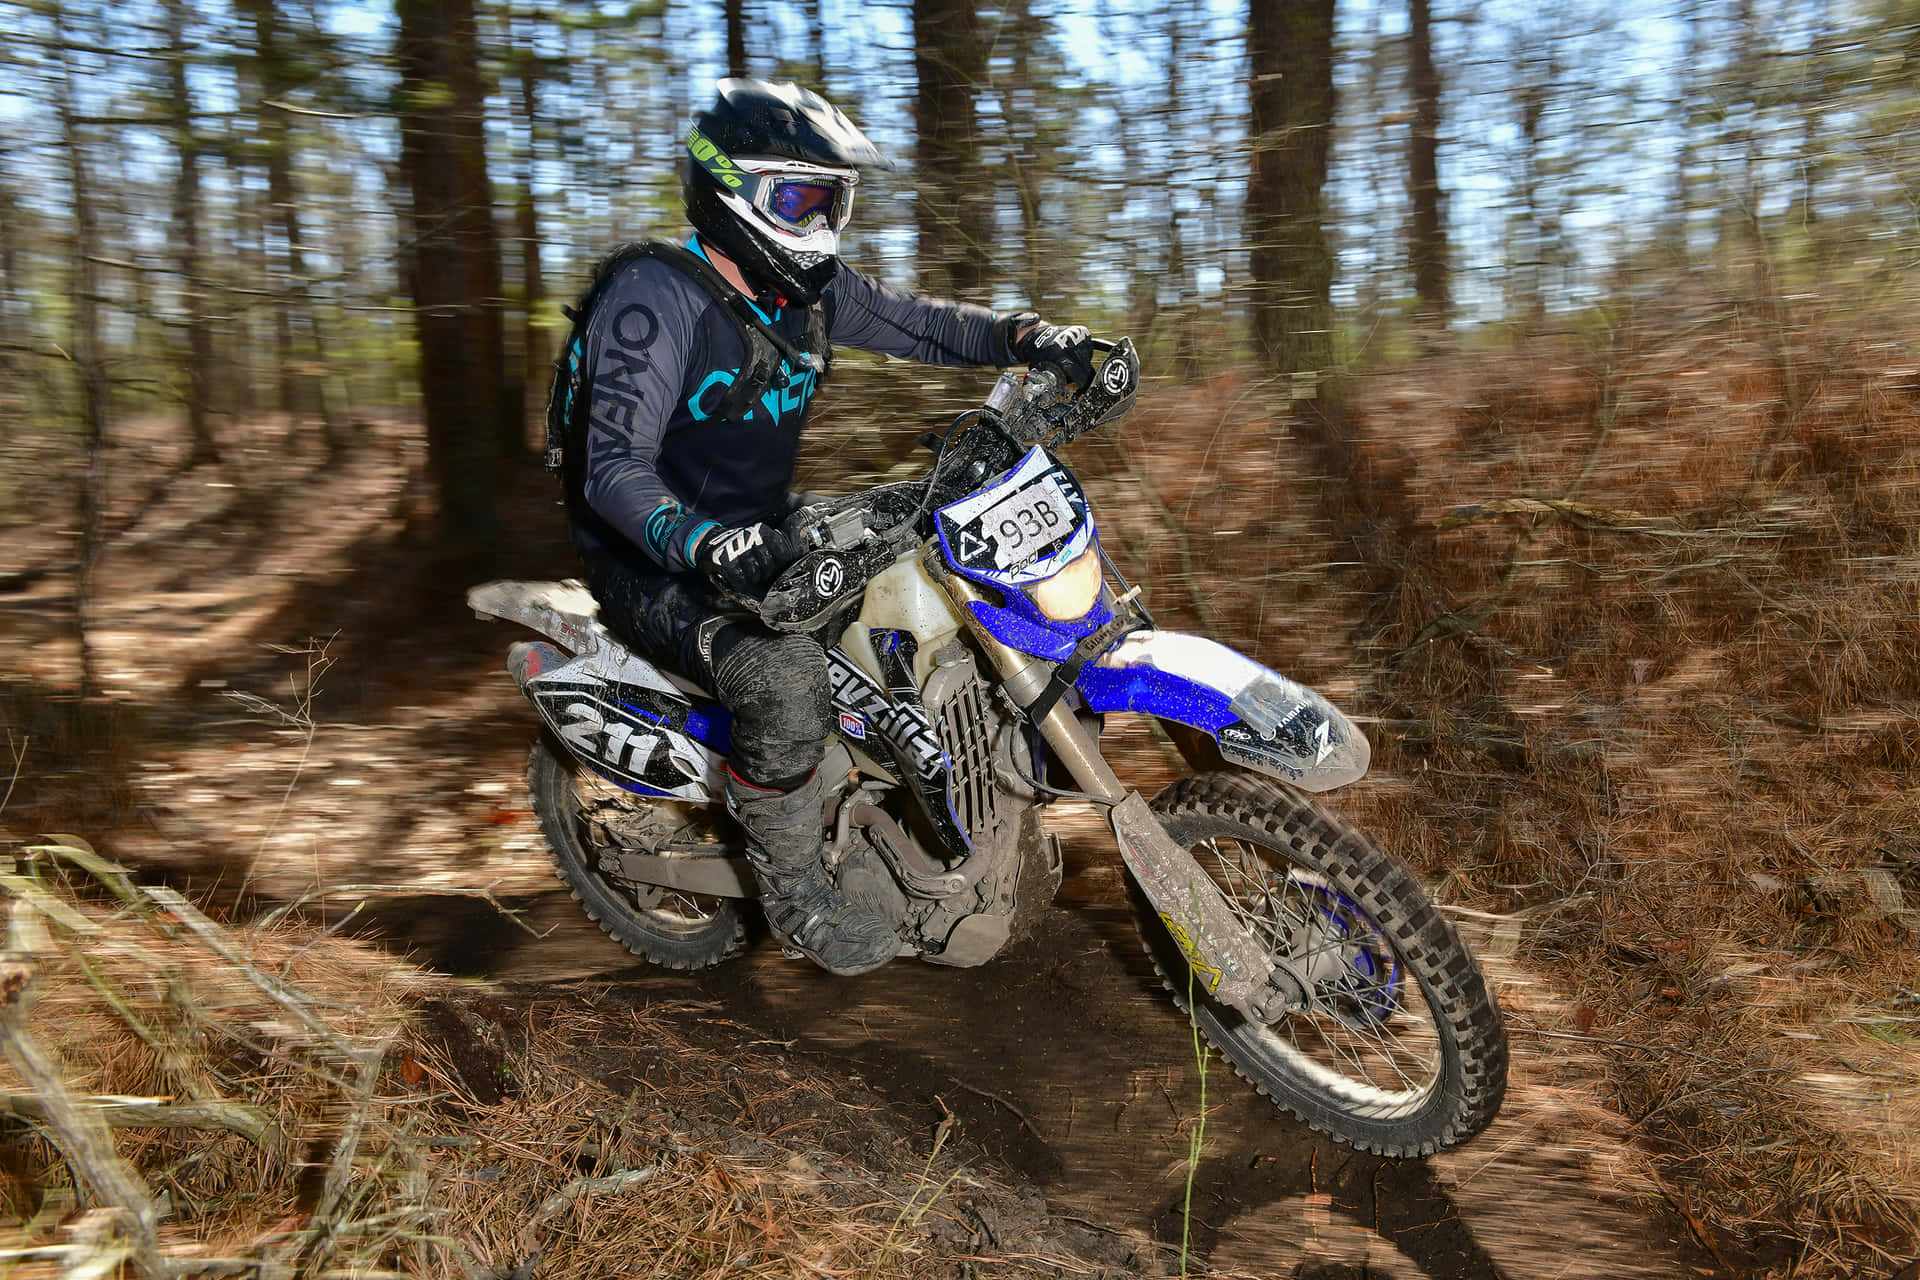 Rider conquering the terrain on a high-speed dirtbike.